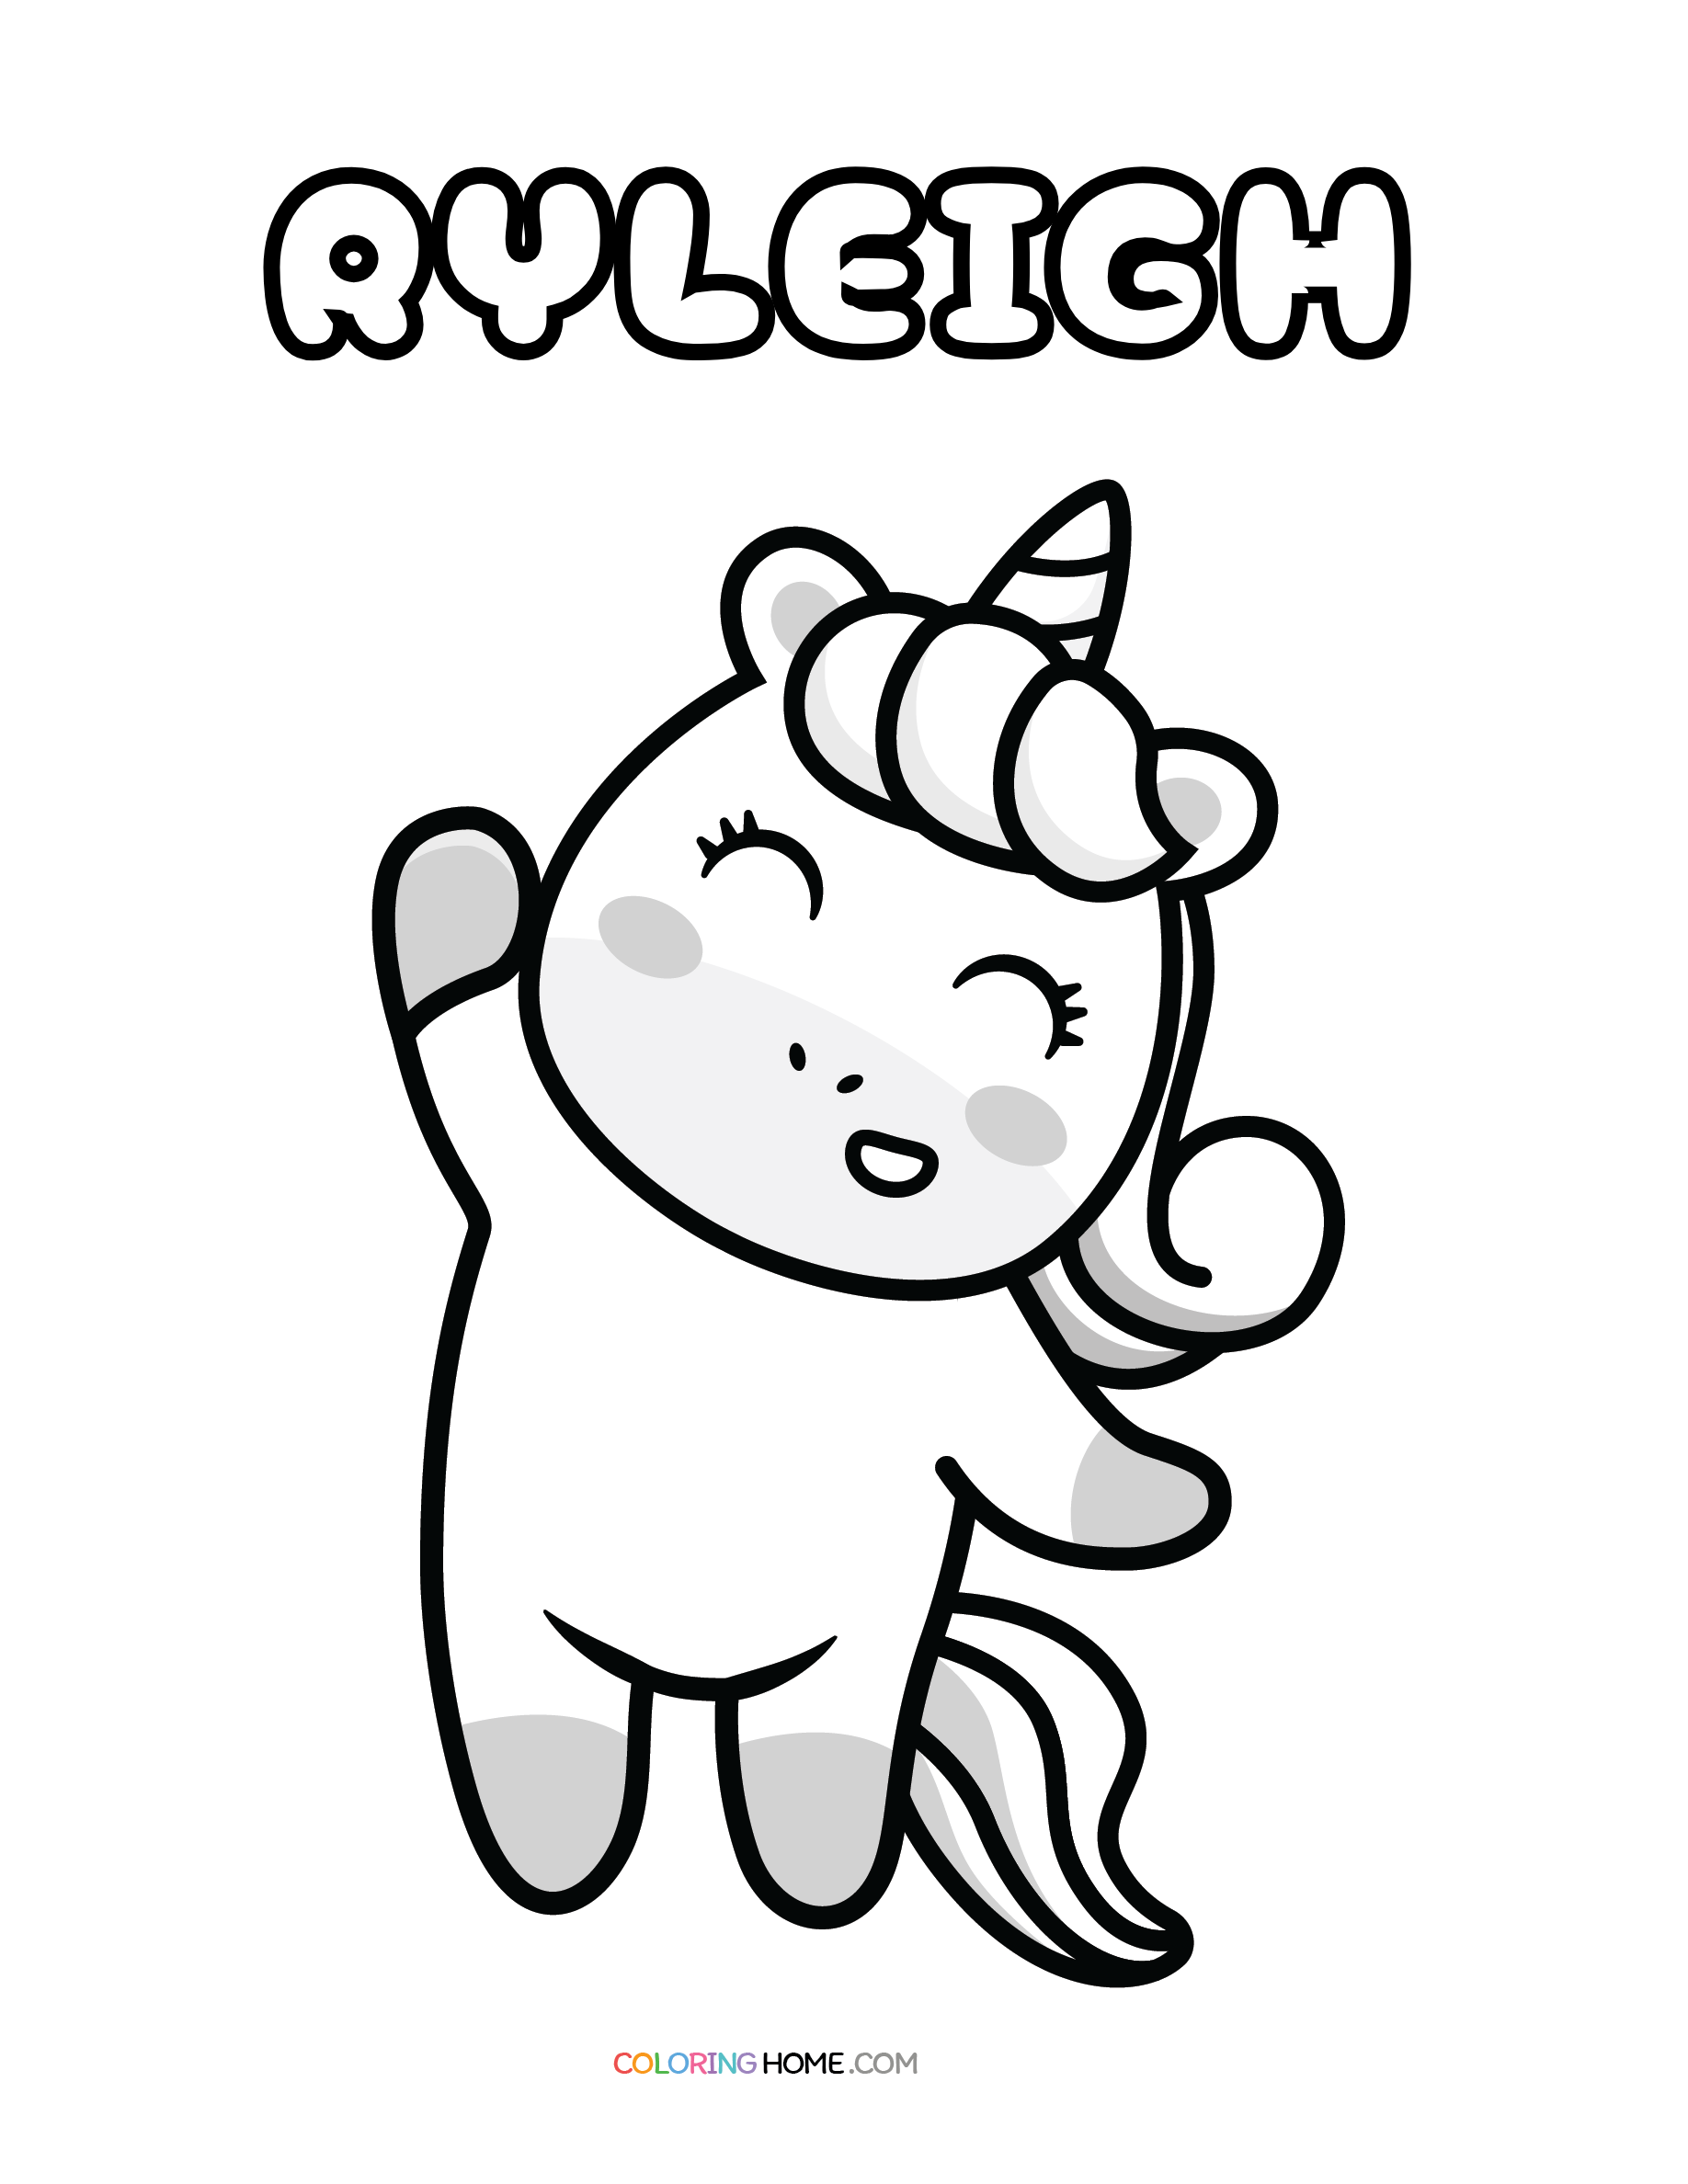 Ryleigh unicorn coloring page